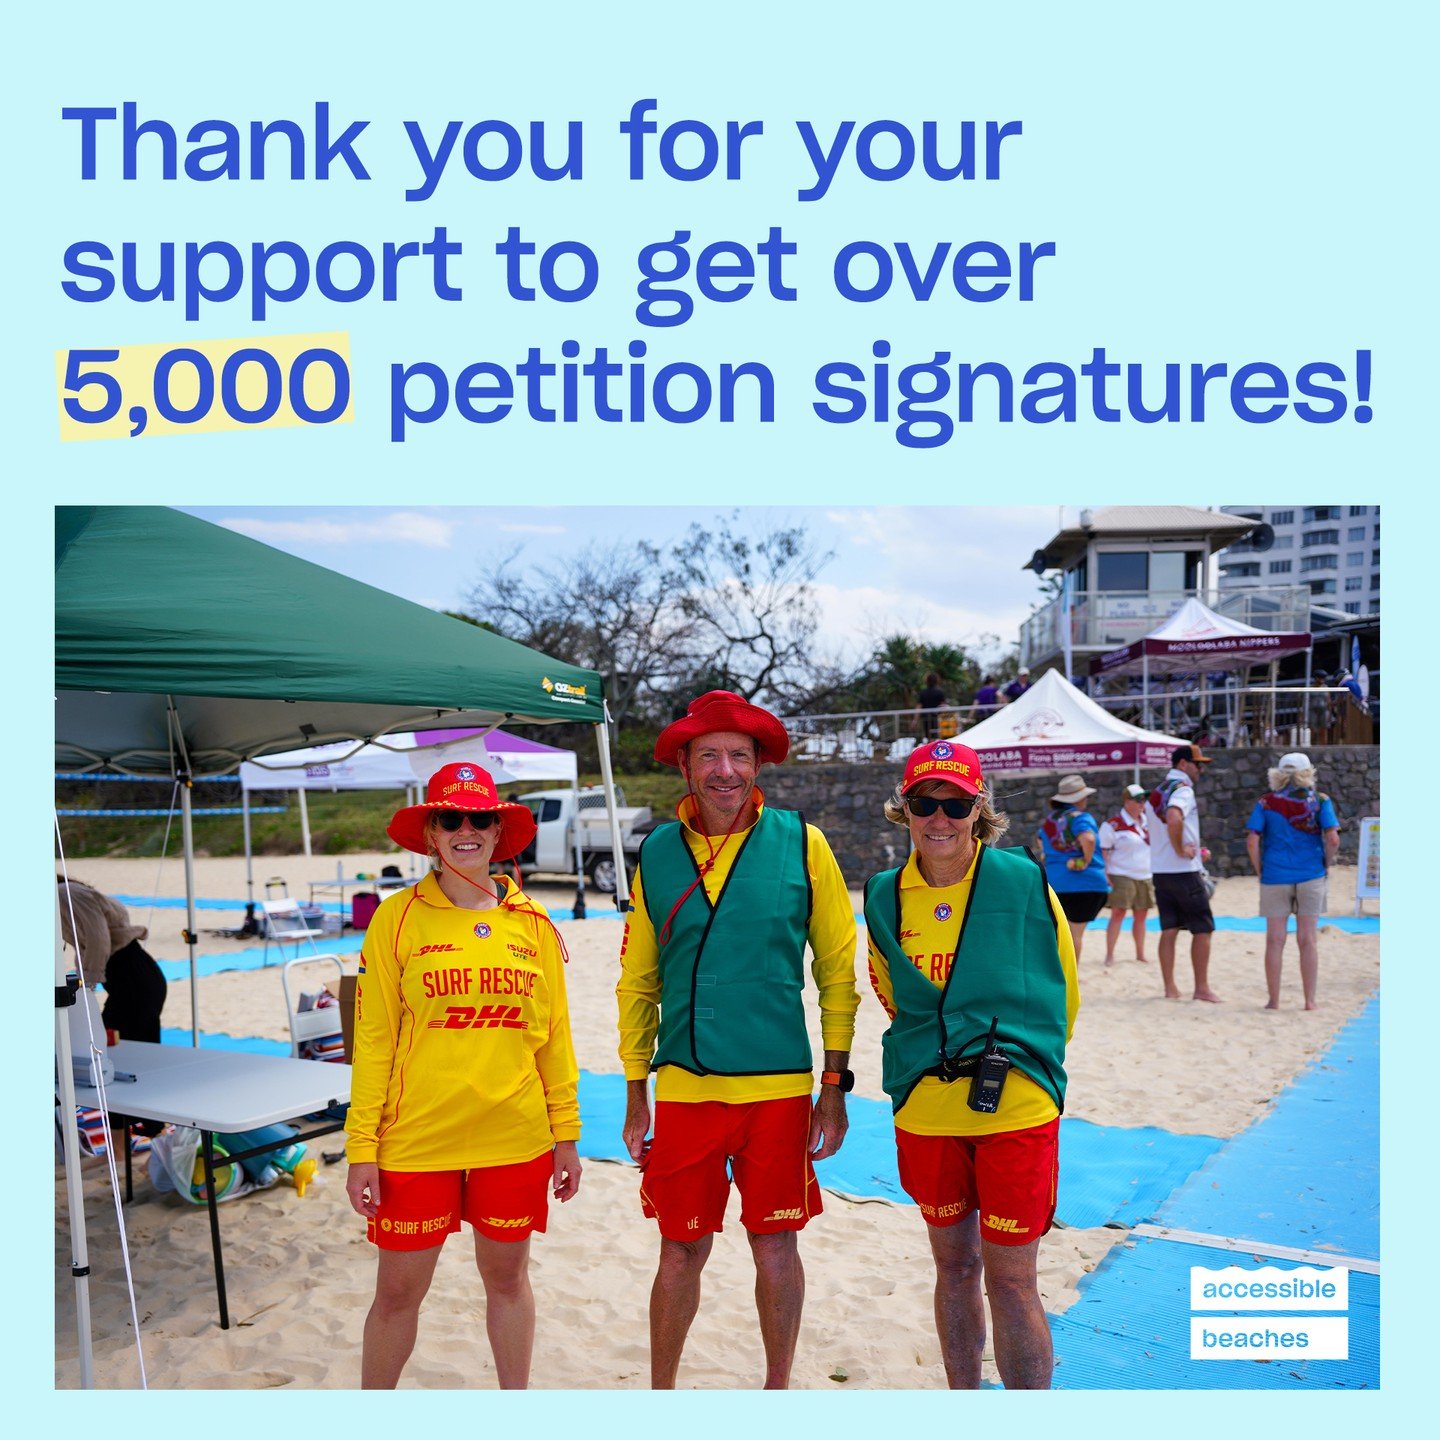 We've reached over 5,000 signatures! 🏅

THANK YOU 🤗 to our amazing community for supporting us to reach 5,000 signatures for our petition. Let's aim for more! 

📝Share our petition with your network and help us make more of our beautiful beaches a